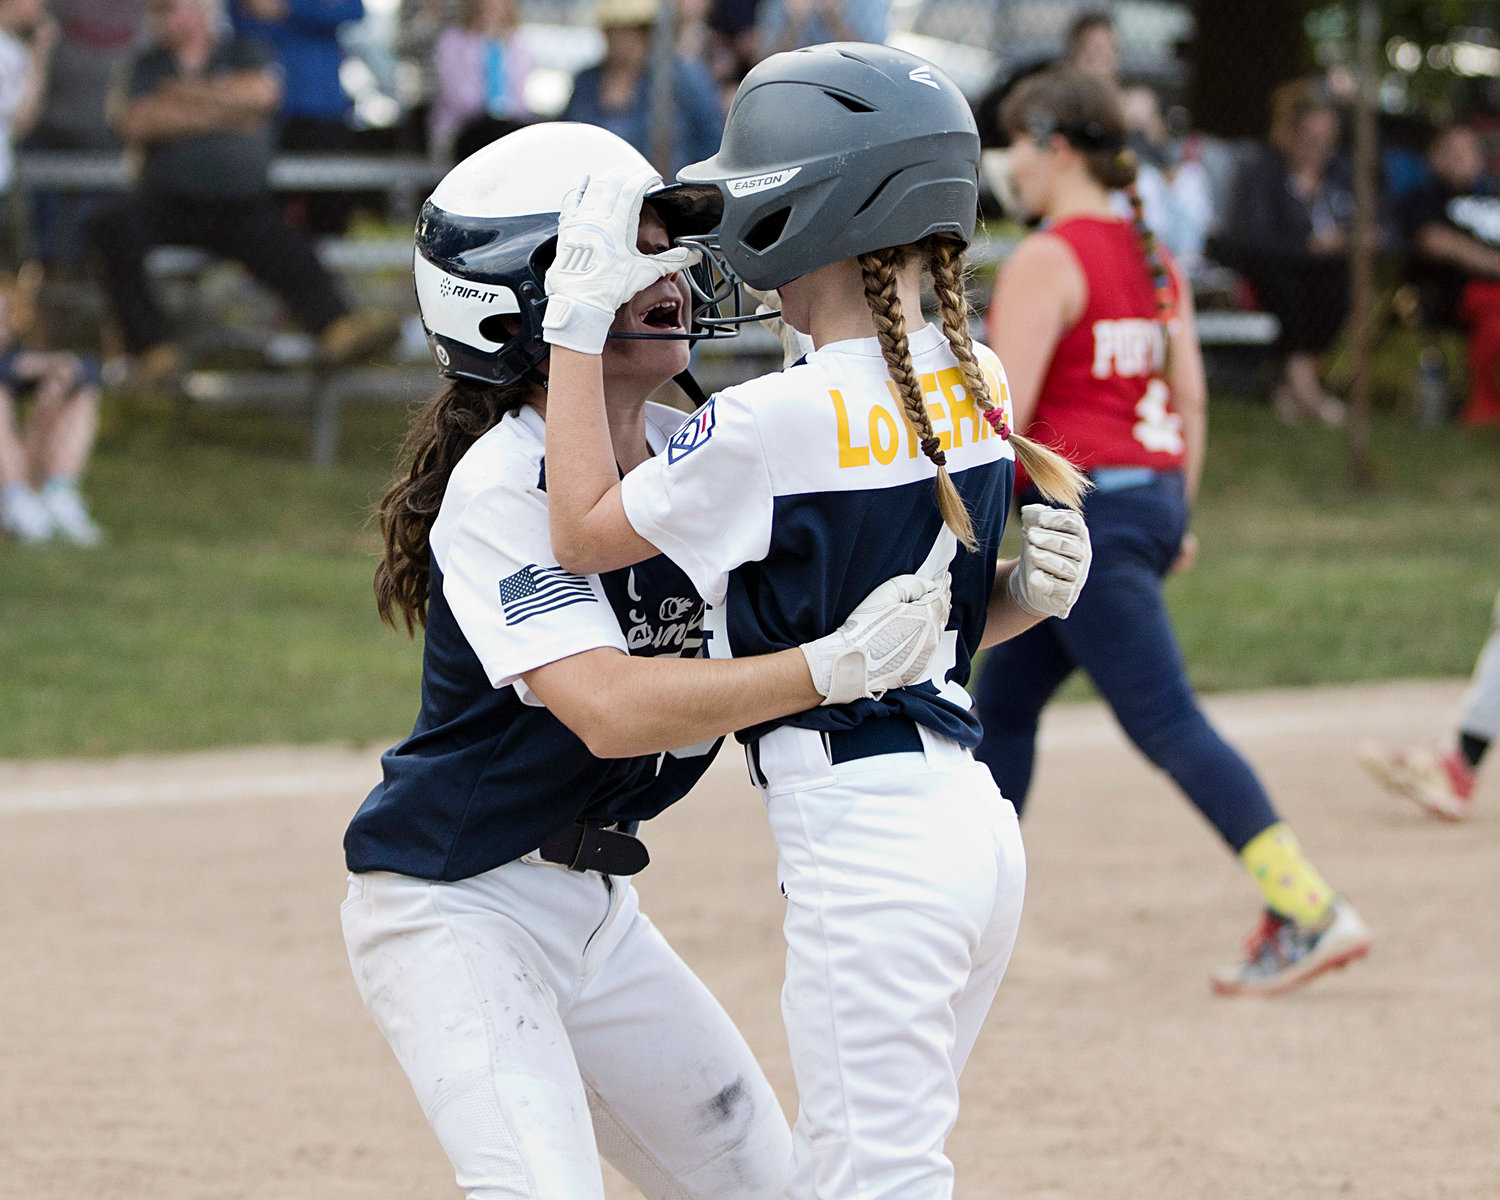 Barrington's Keira Martin (left) hugs Sky LoVerme after Sky drove in the winning run in the bottom of the sixth inning, in the District 2 All-Star Championship game.